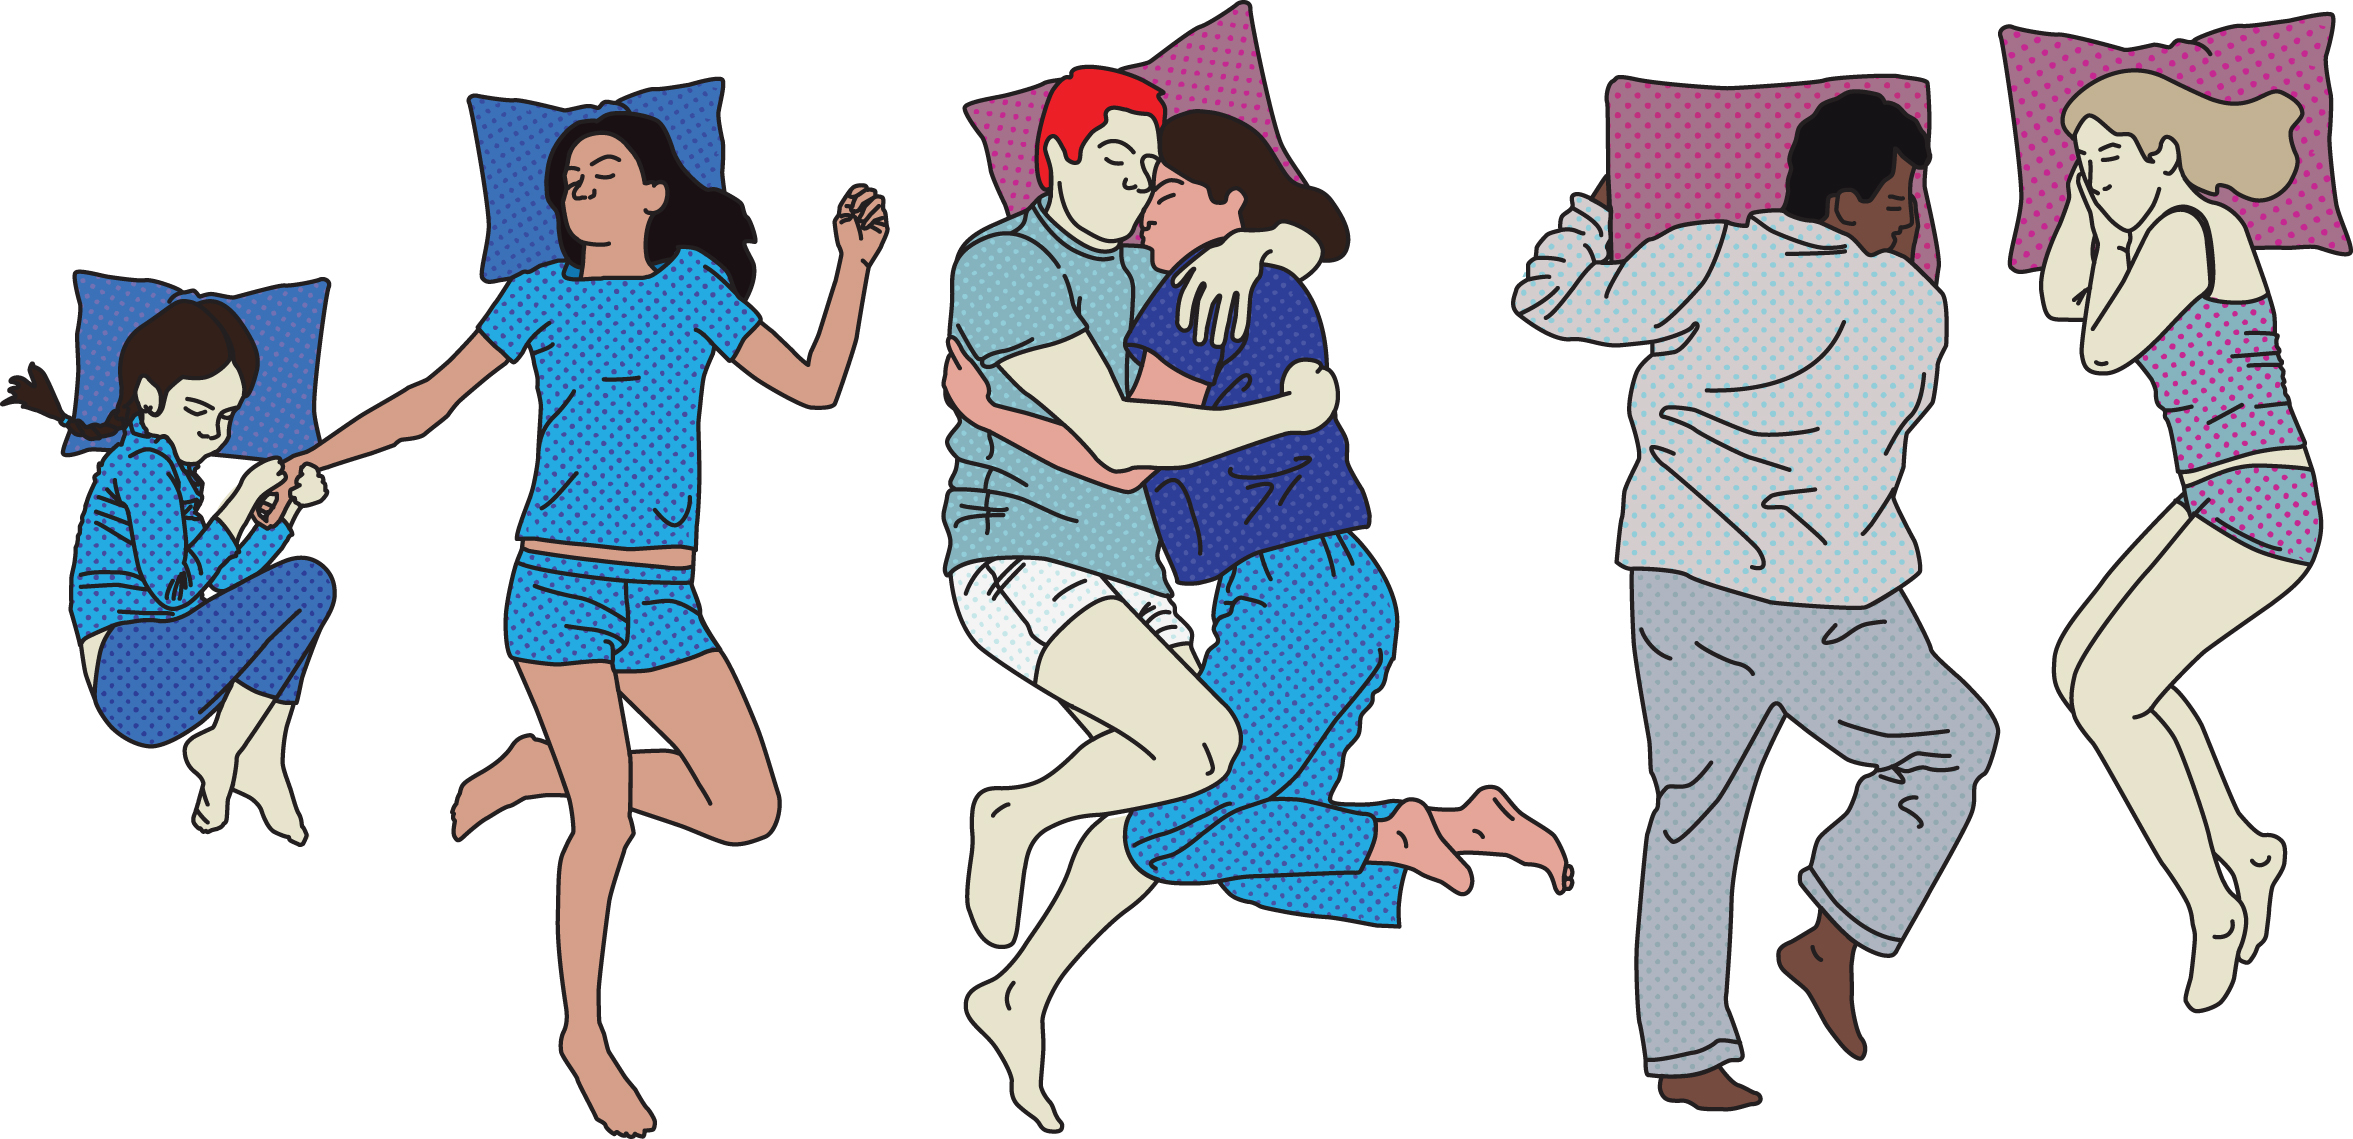 Example of the importance of investigating human behaviour in e.g. sleep ergonomics, as people assume different postures and move during sleep. Illustration by Allison Pottasch and Maxim Smulders.